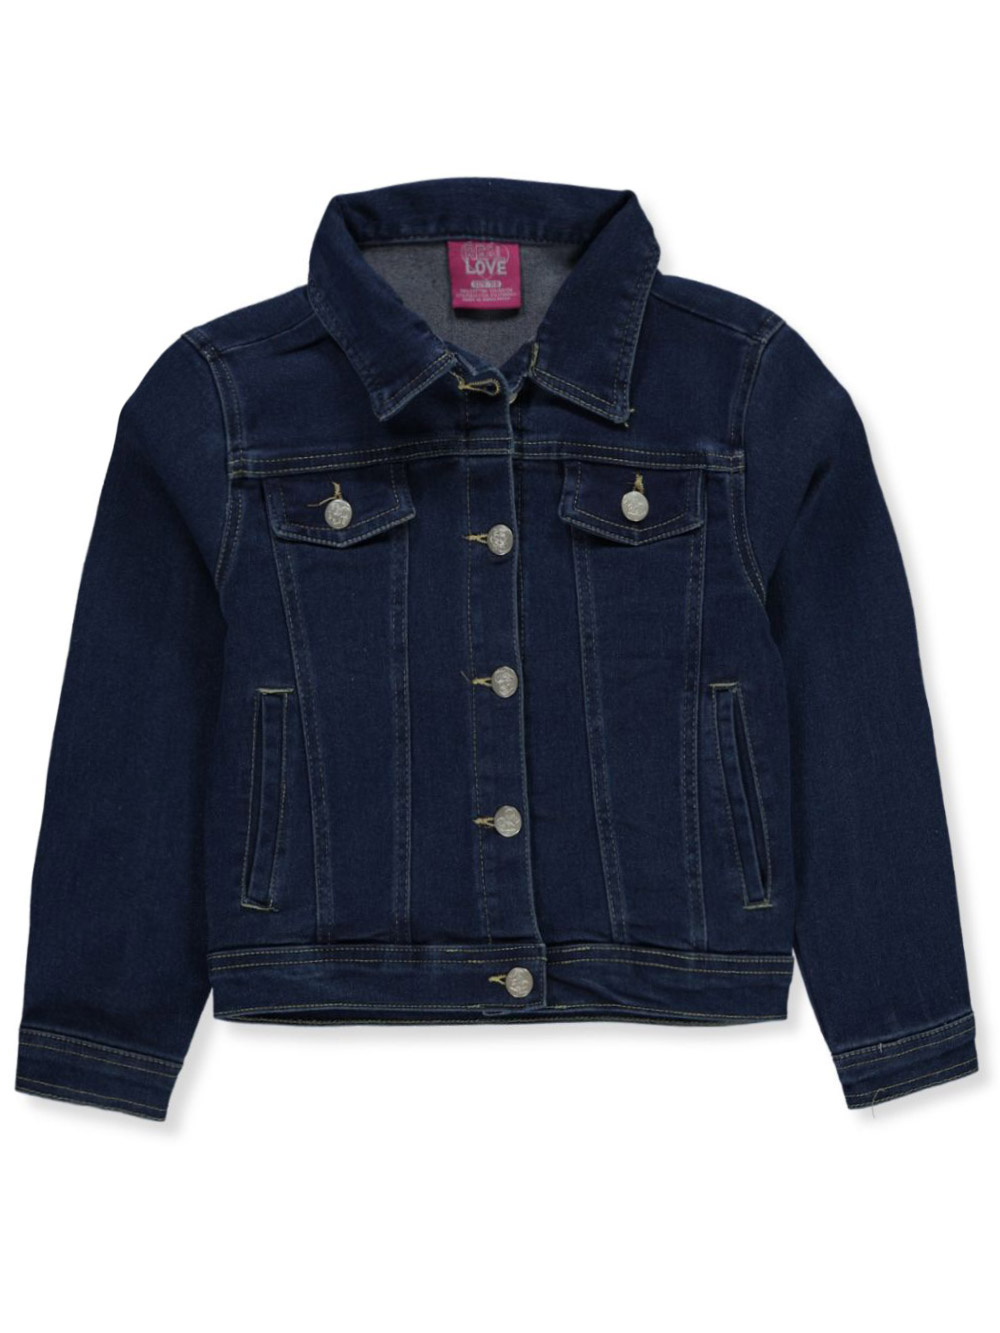 Girls' Embroidered Daisies Jean Jacket - Cat & Jack™ Light Wash : Target